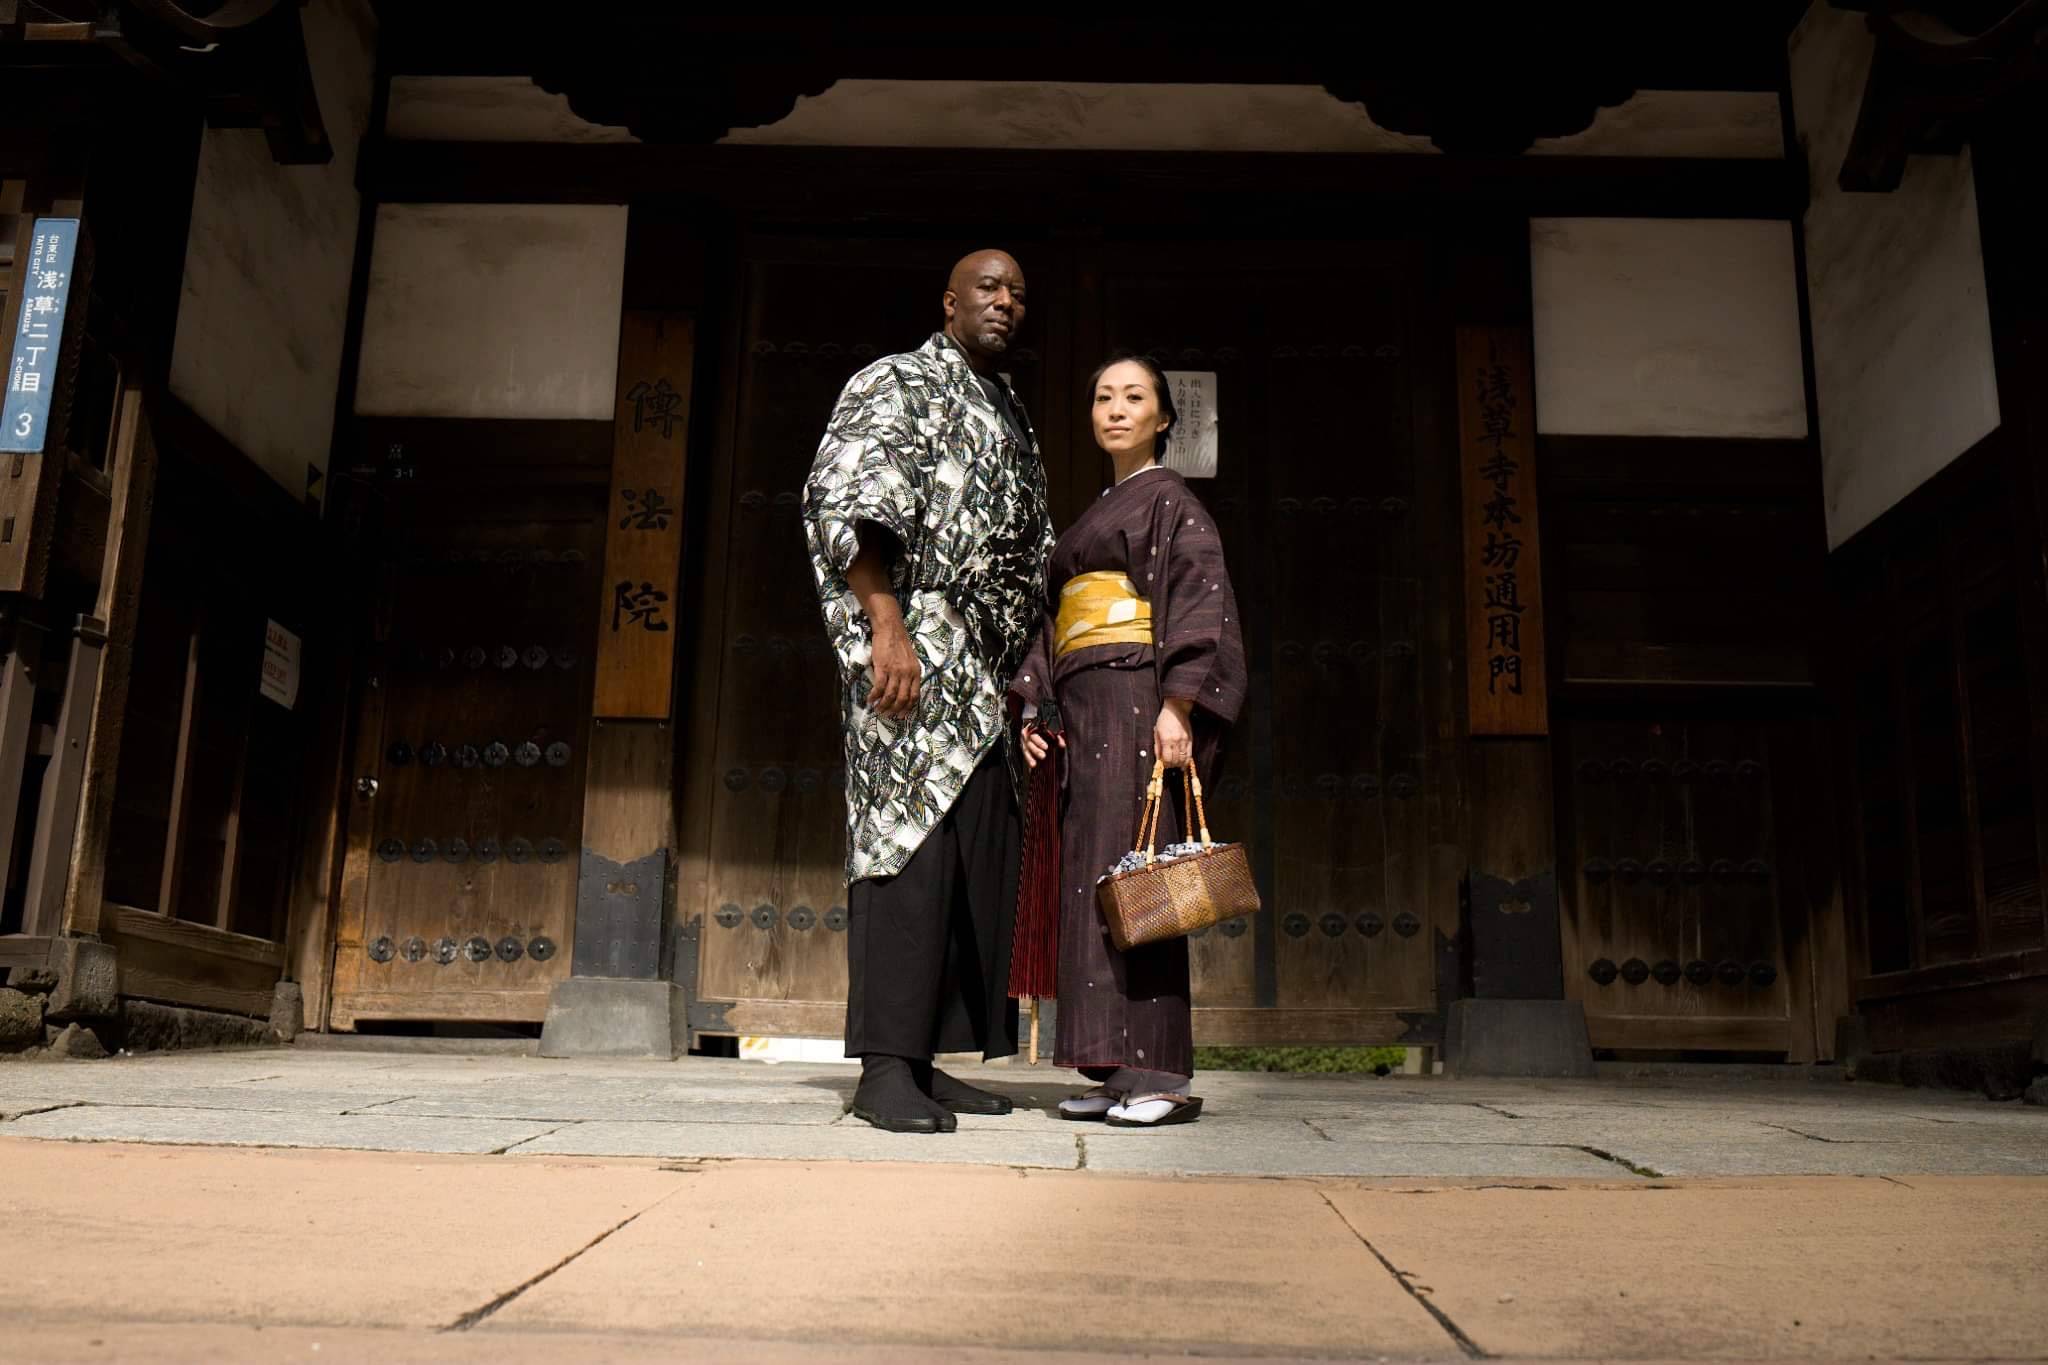 Matthew Jordan Smith and his wife, Maki, now call Tokyo home. Smith visited Japan many times before his marriage, developing a love for the country during those trips.  | COURTESY OF MATTHEW JORDAN SMITH